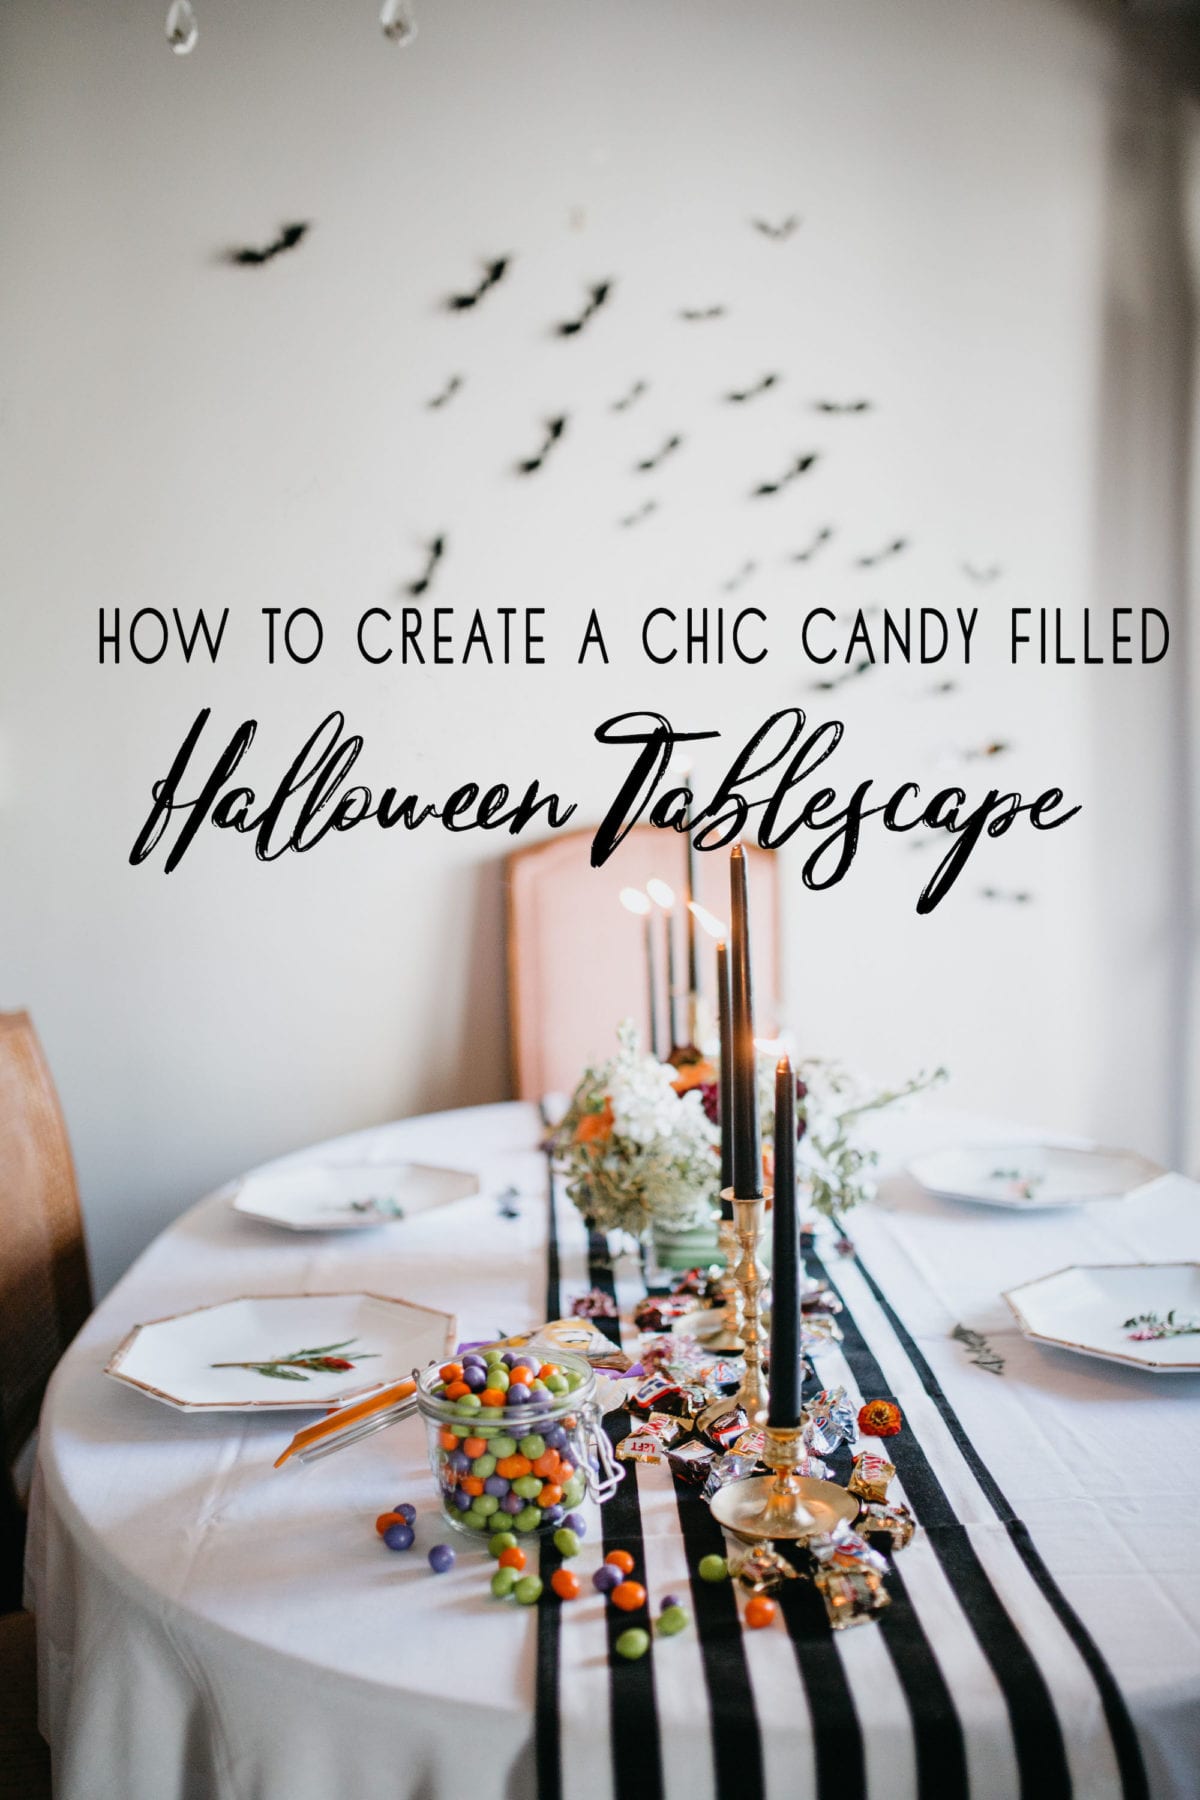 Chic Halloween Tablescape